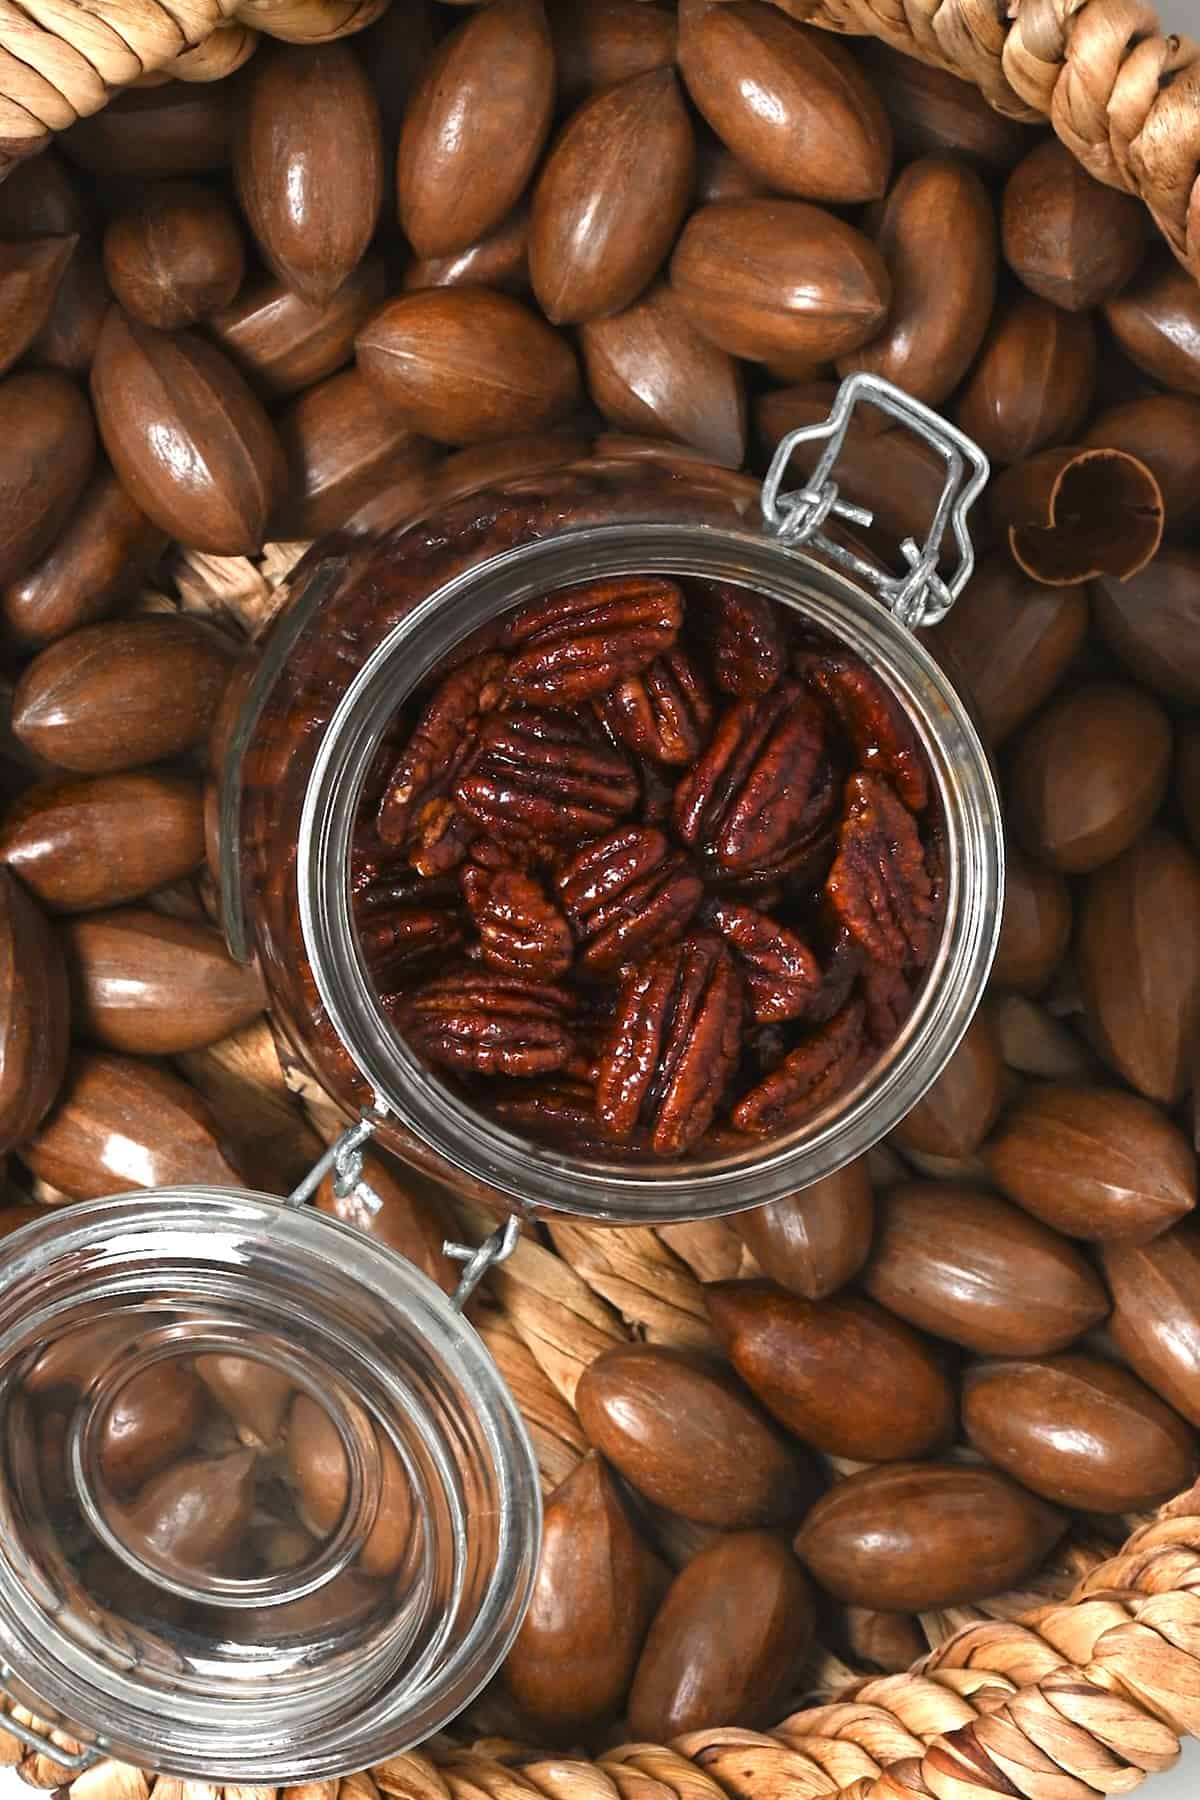 A jar filled with homemade candied pecans over pecans in their shells